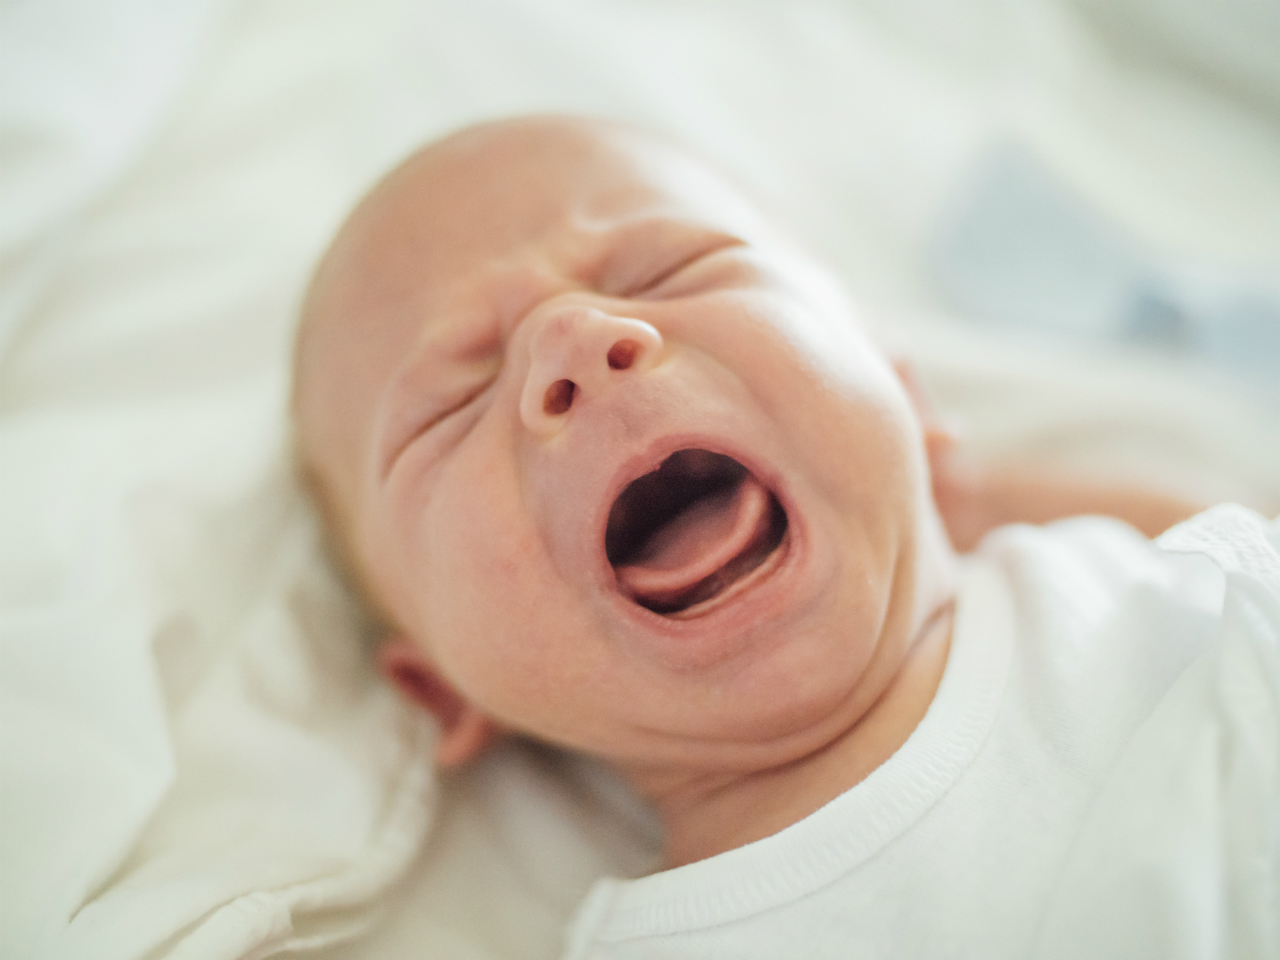 Colic: The longest few months of your life